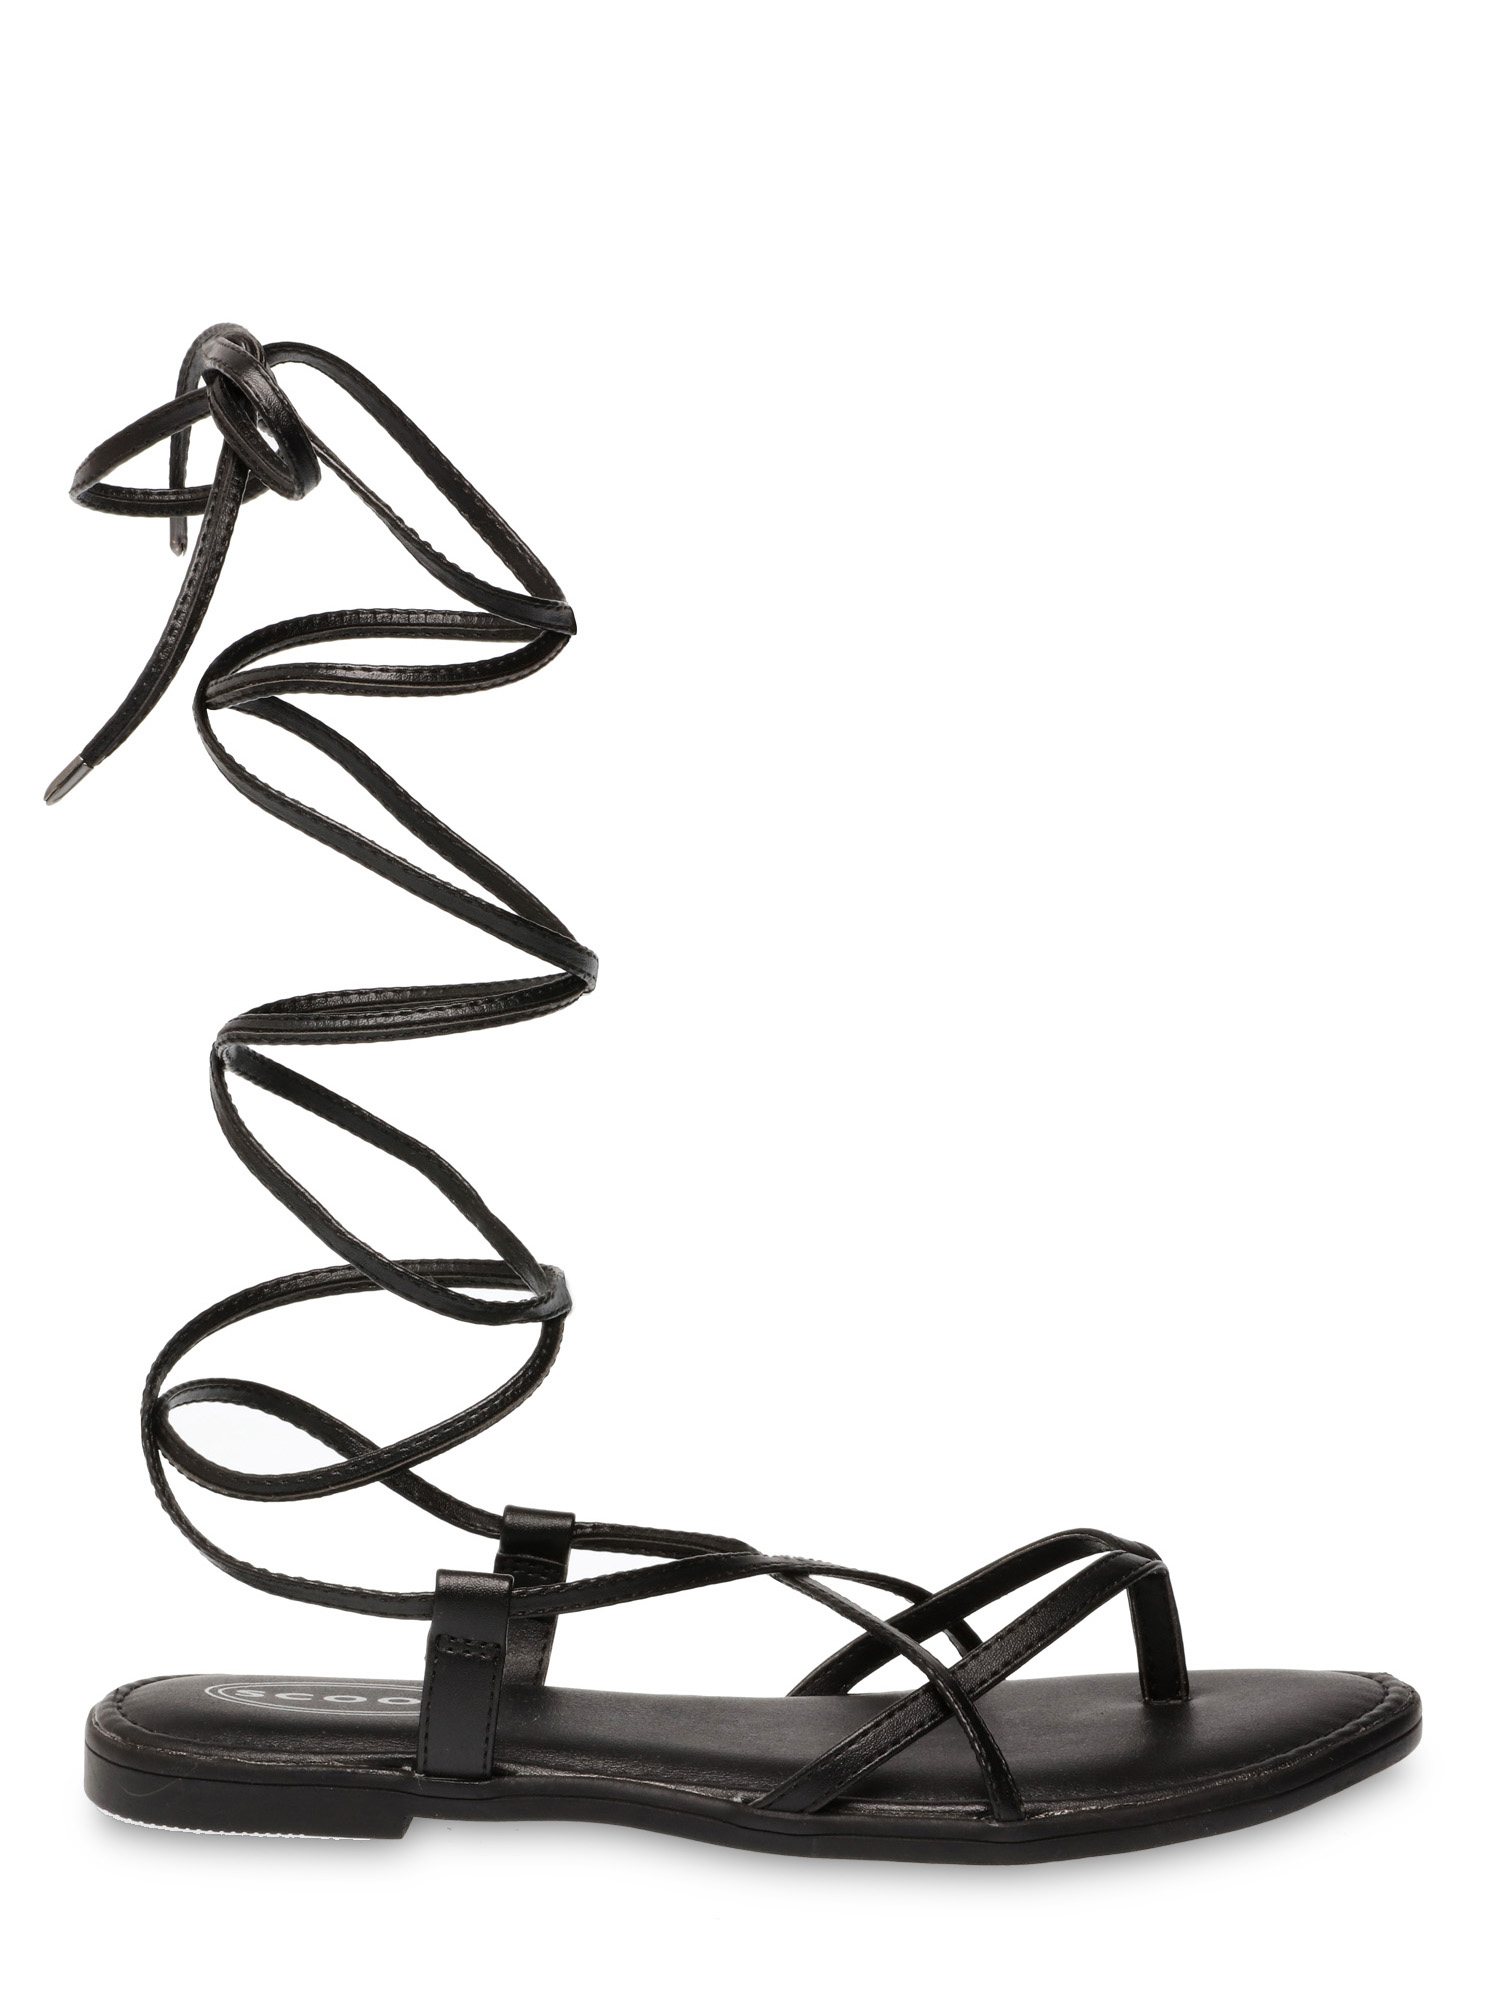 Scoop Women's Zoey Lace Up Thong Sandals - image 2 of 6